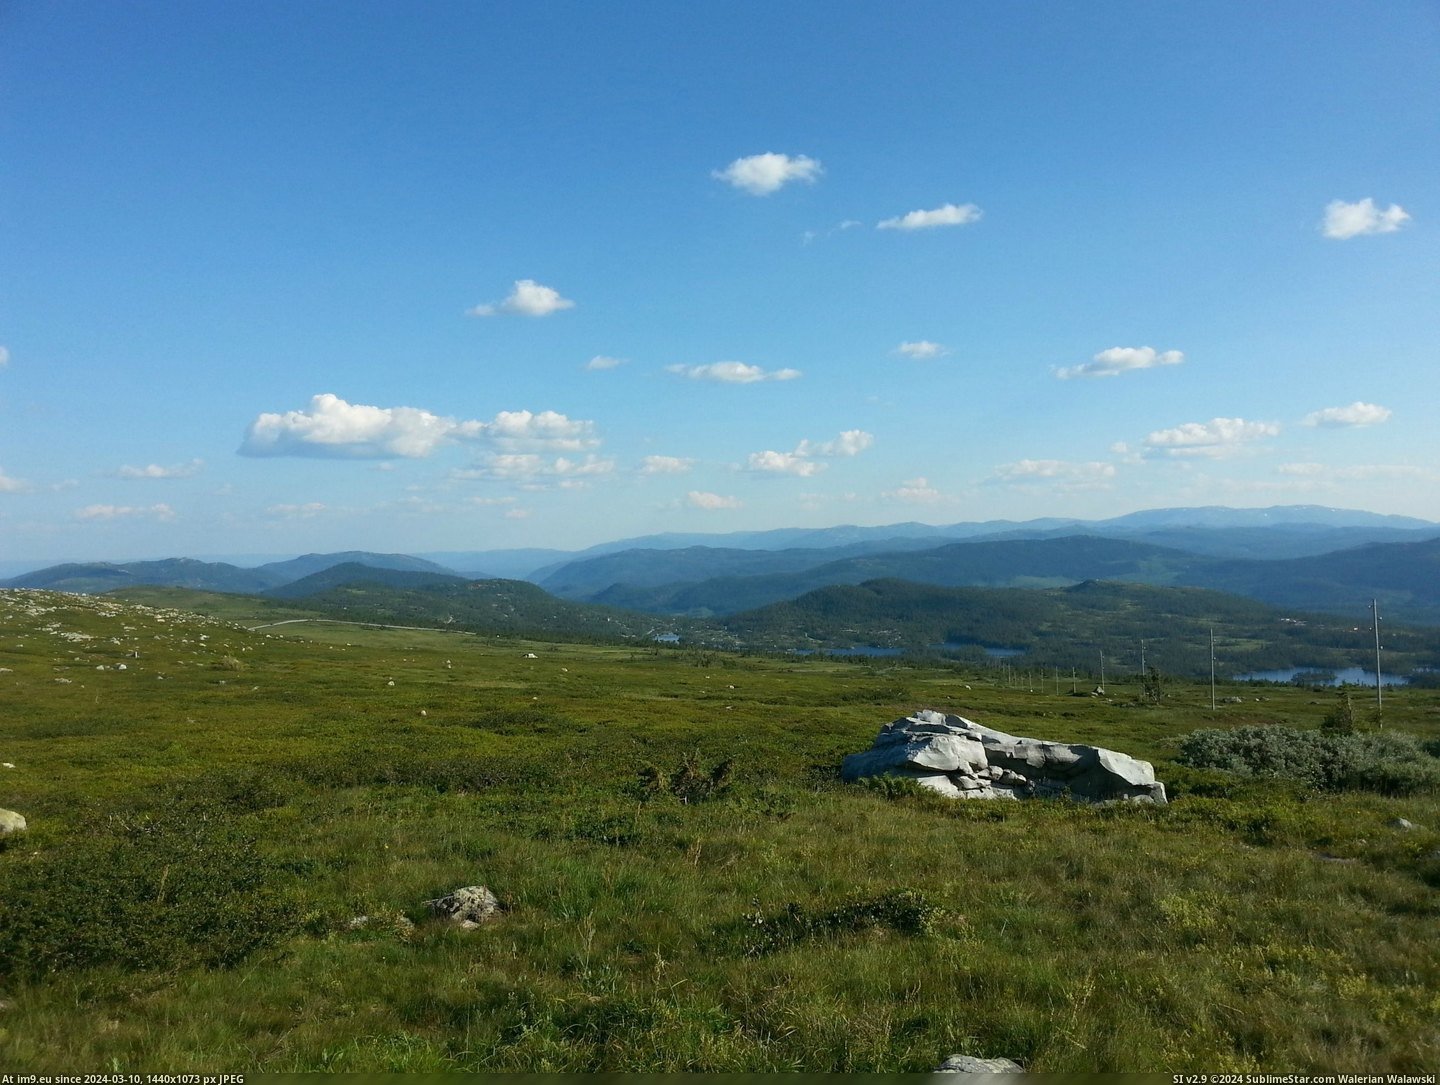 #Day #Way #Norway #2448x1836 #Gaustatoppen #Clear #Base #Sweden [Earthporn] They say you can see all the way to Sweden on a clear day -- from the base of Gaustatoppen, Norway [2448x1836] Pic. (Image of album My r/EARTHPORN favs))